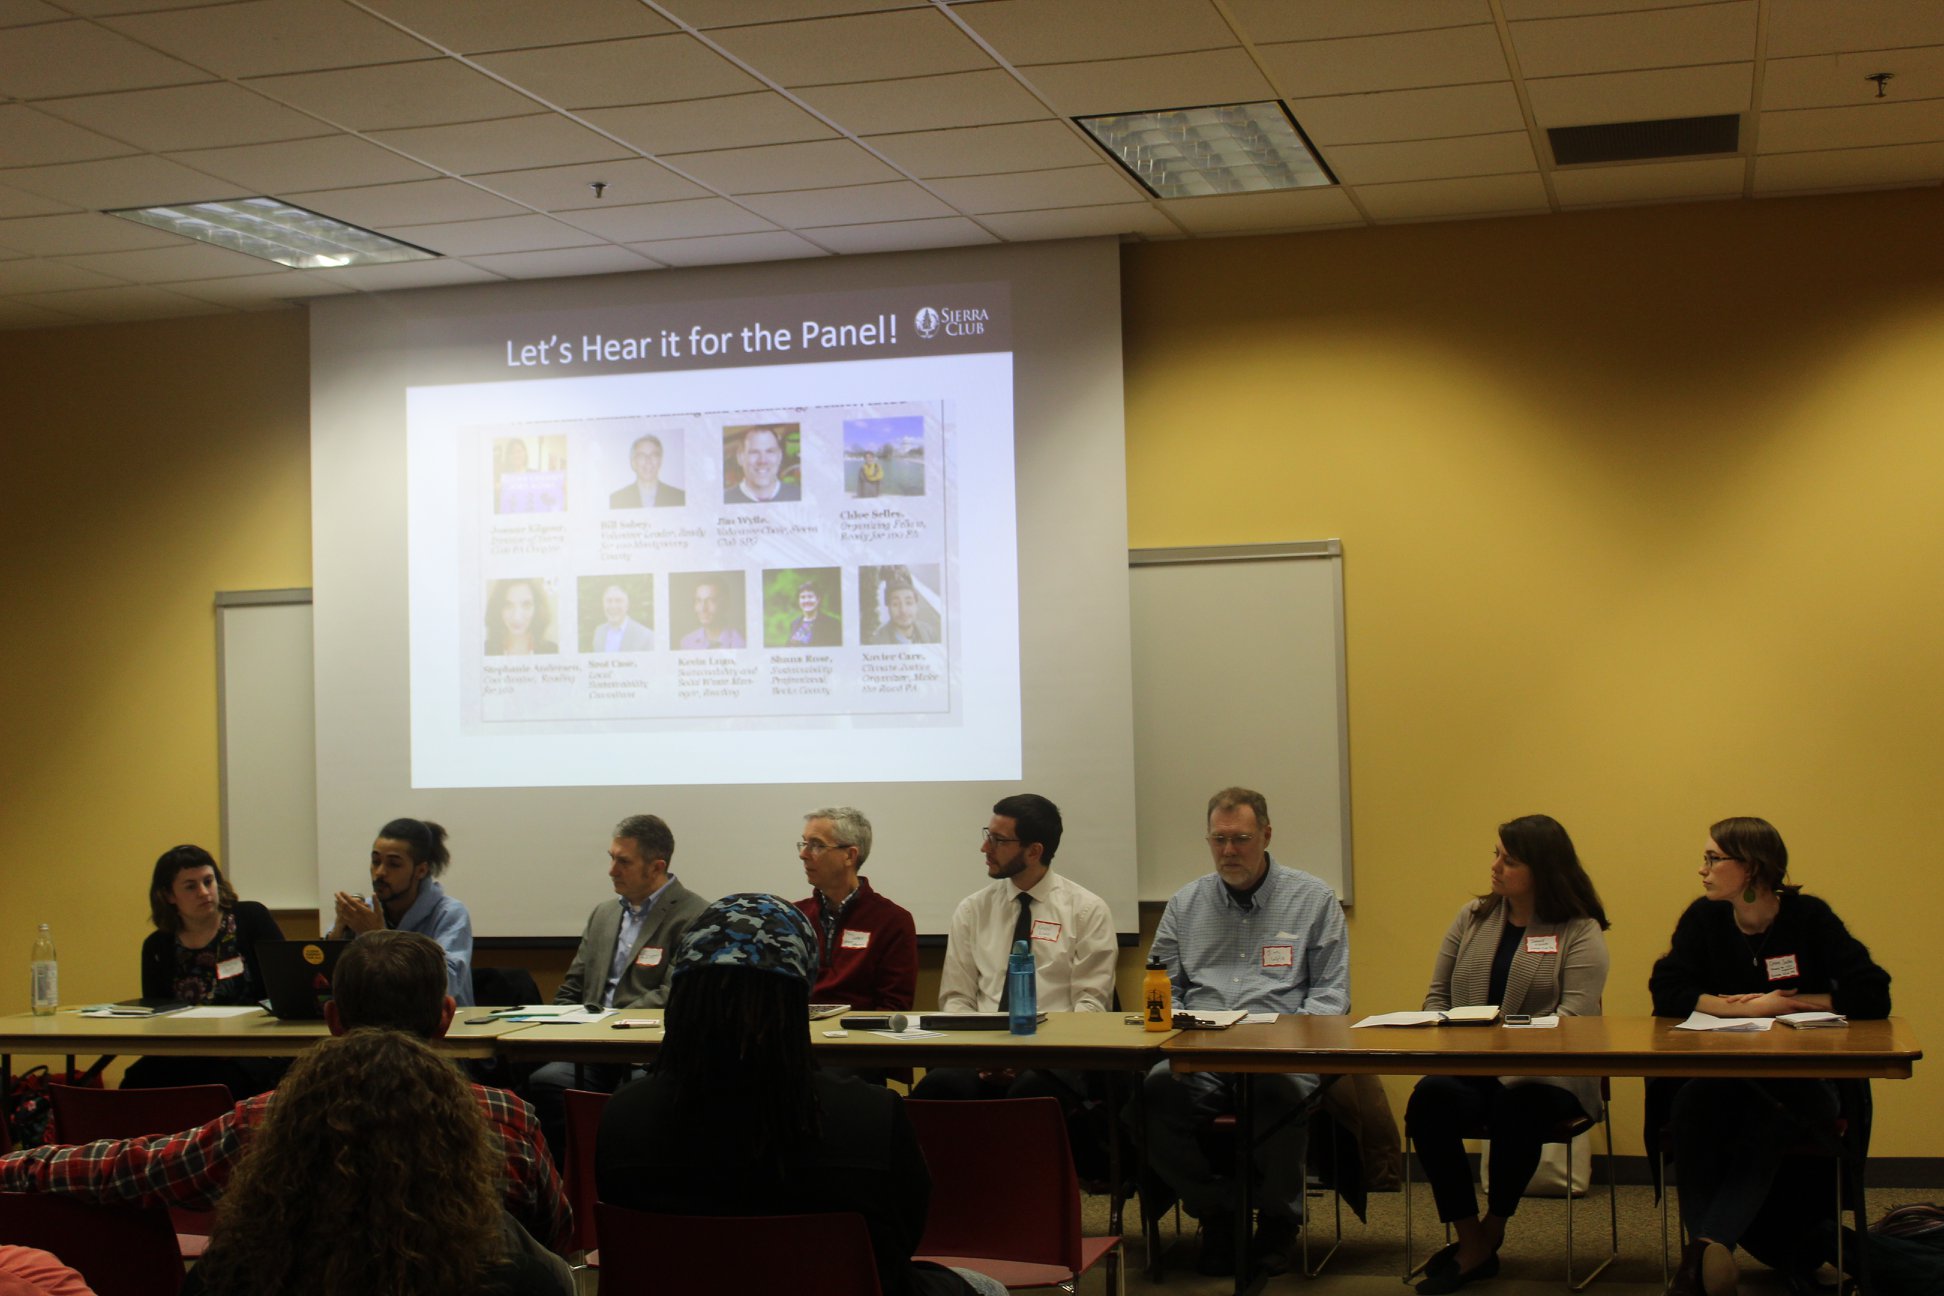 A public panel discussion on 100% clean energy in Reading and across PA